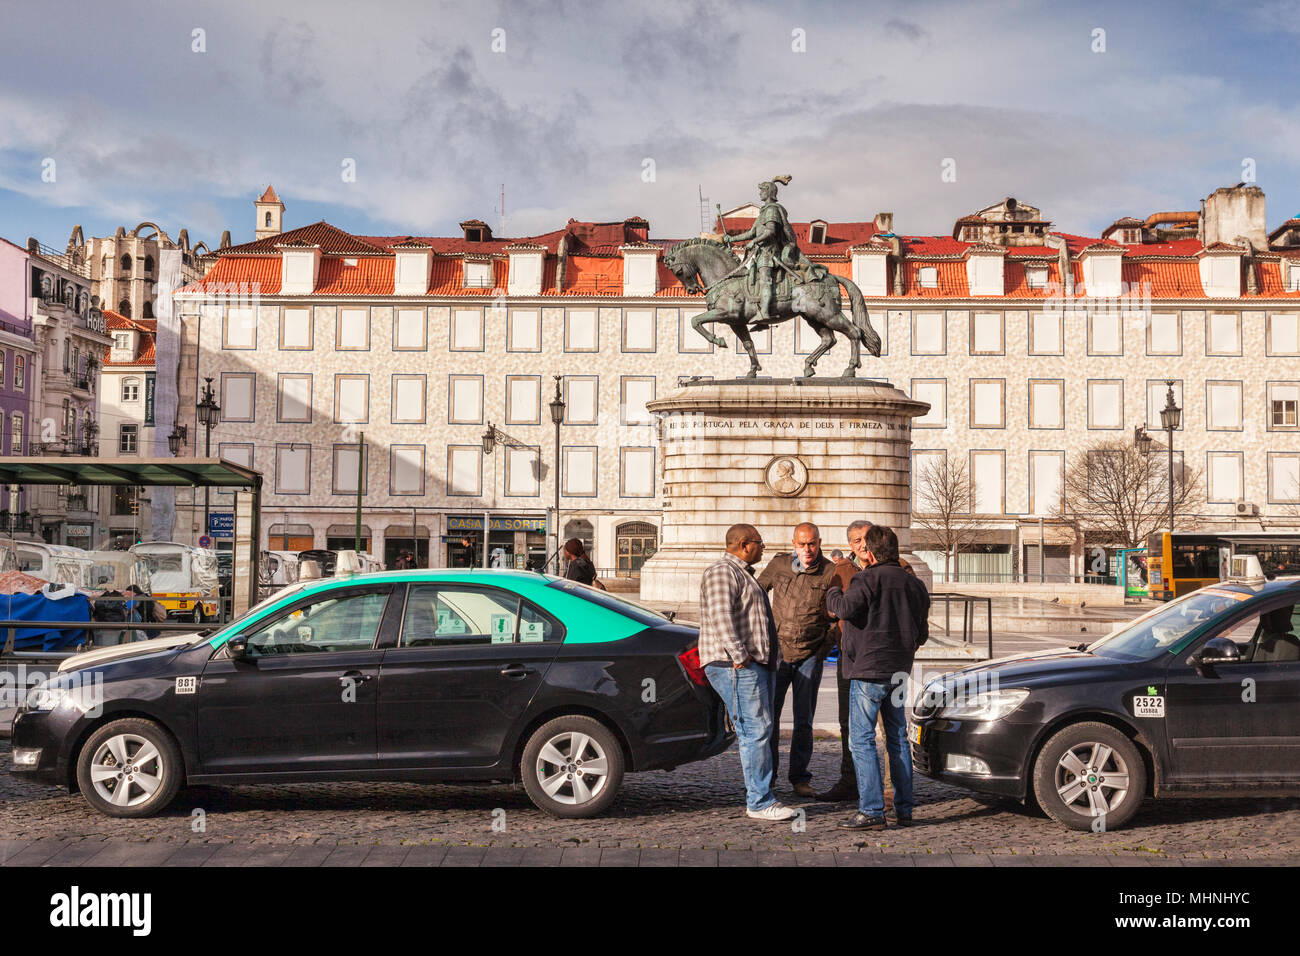 27 February 2018: Lisbon, Portugal - Taxi drivers chat as they wait for customers in Figueira Square. Stock Photo